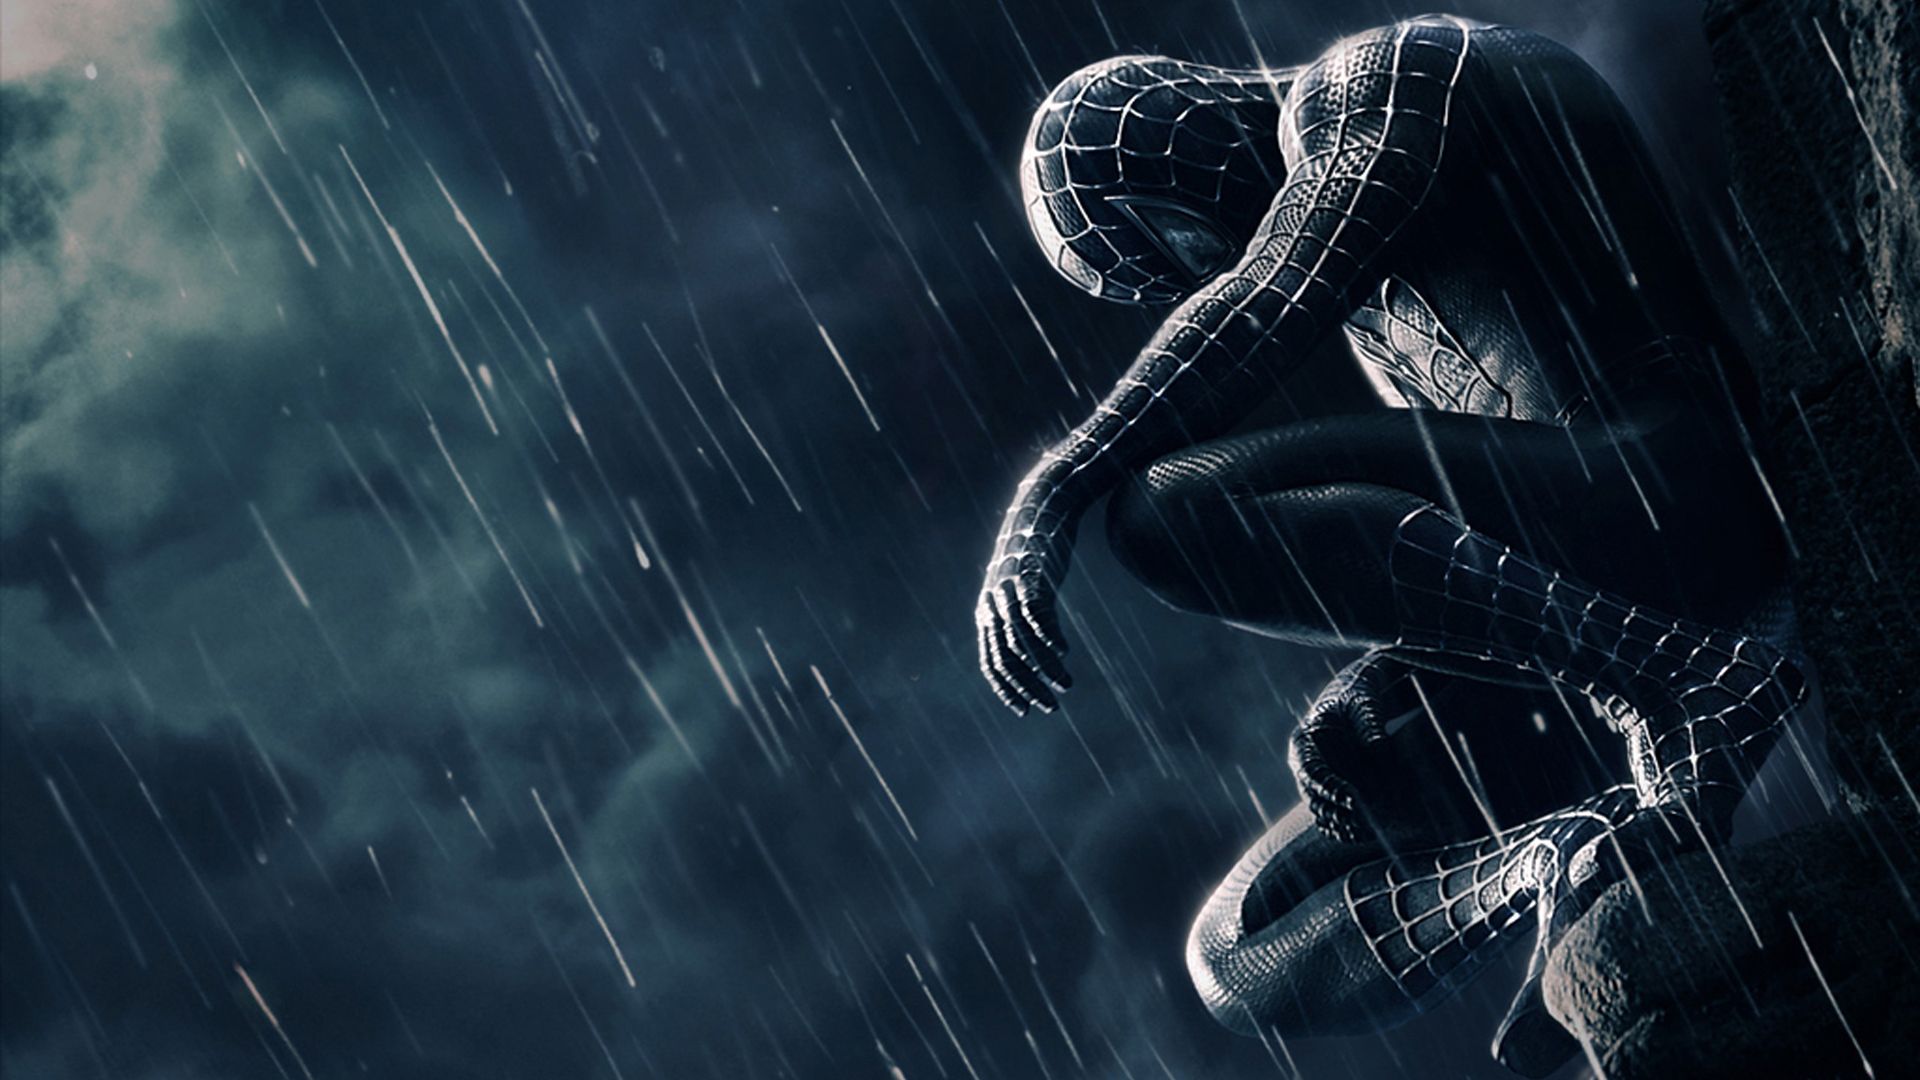 Spiderman HD Wallpapers - , New Wallpapers, New Backgrounds